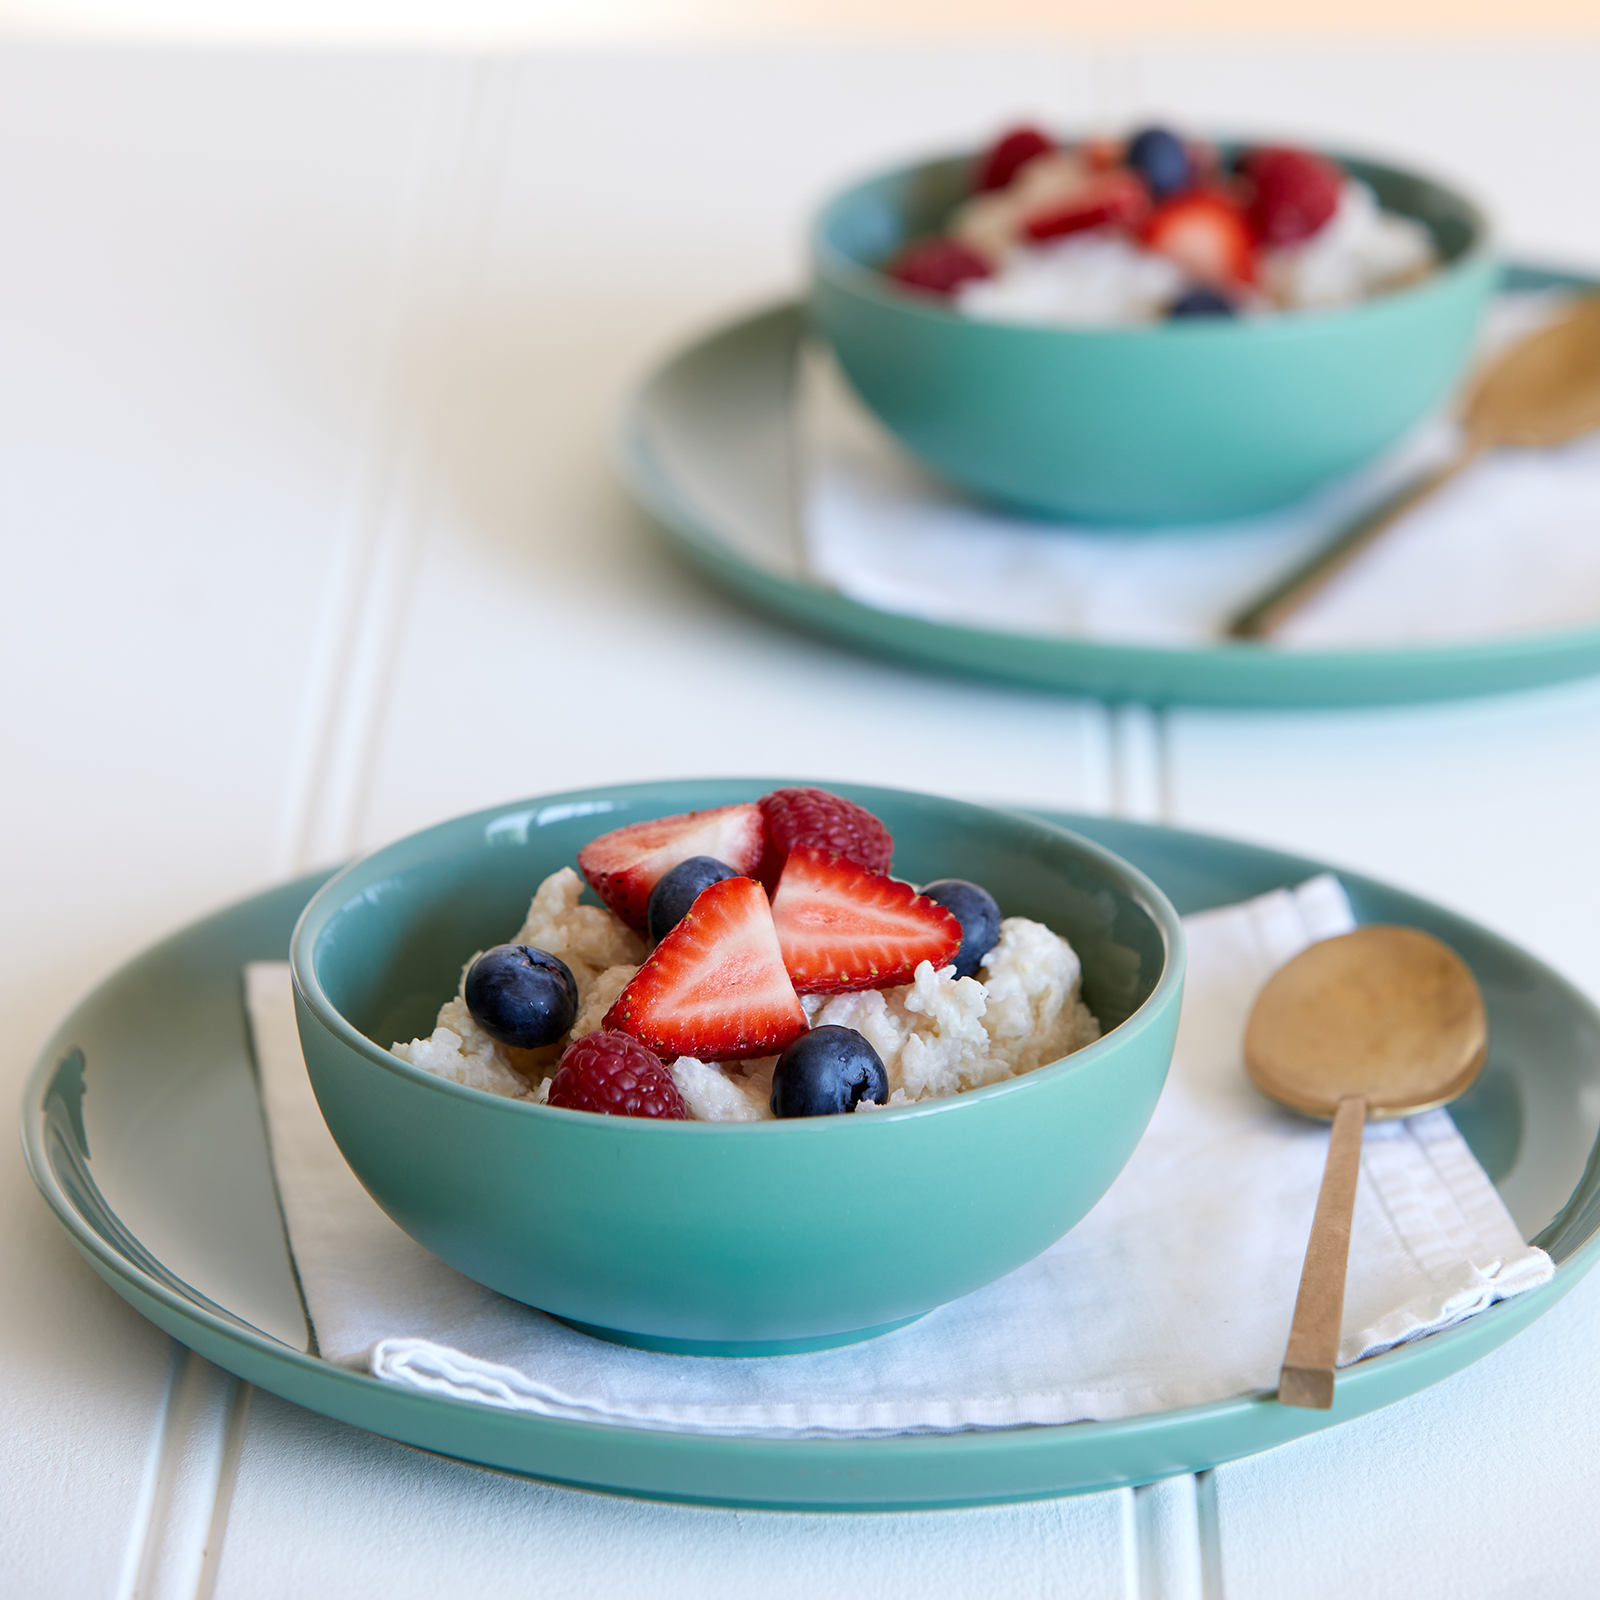 Two green/blue bowls of vegan coconut rice each sit on a large flat plate with a napkin and gold spoon. The rice is topped with fresh strawberries and blueberries.